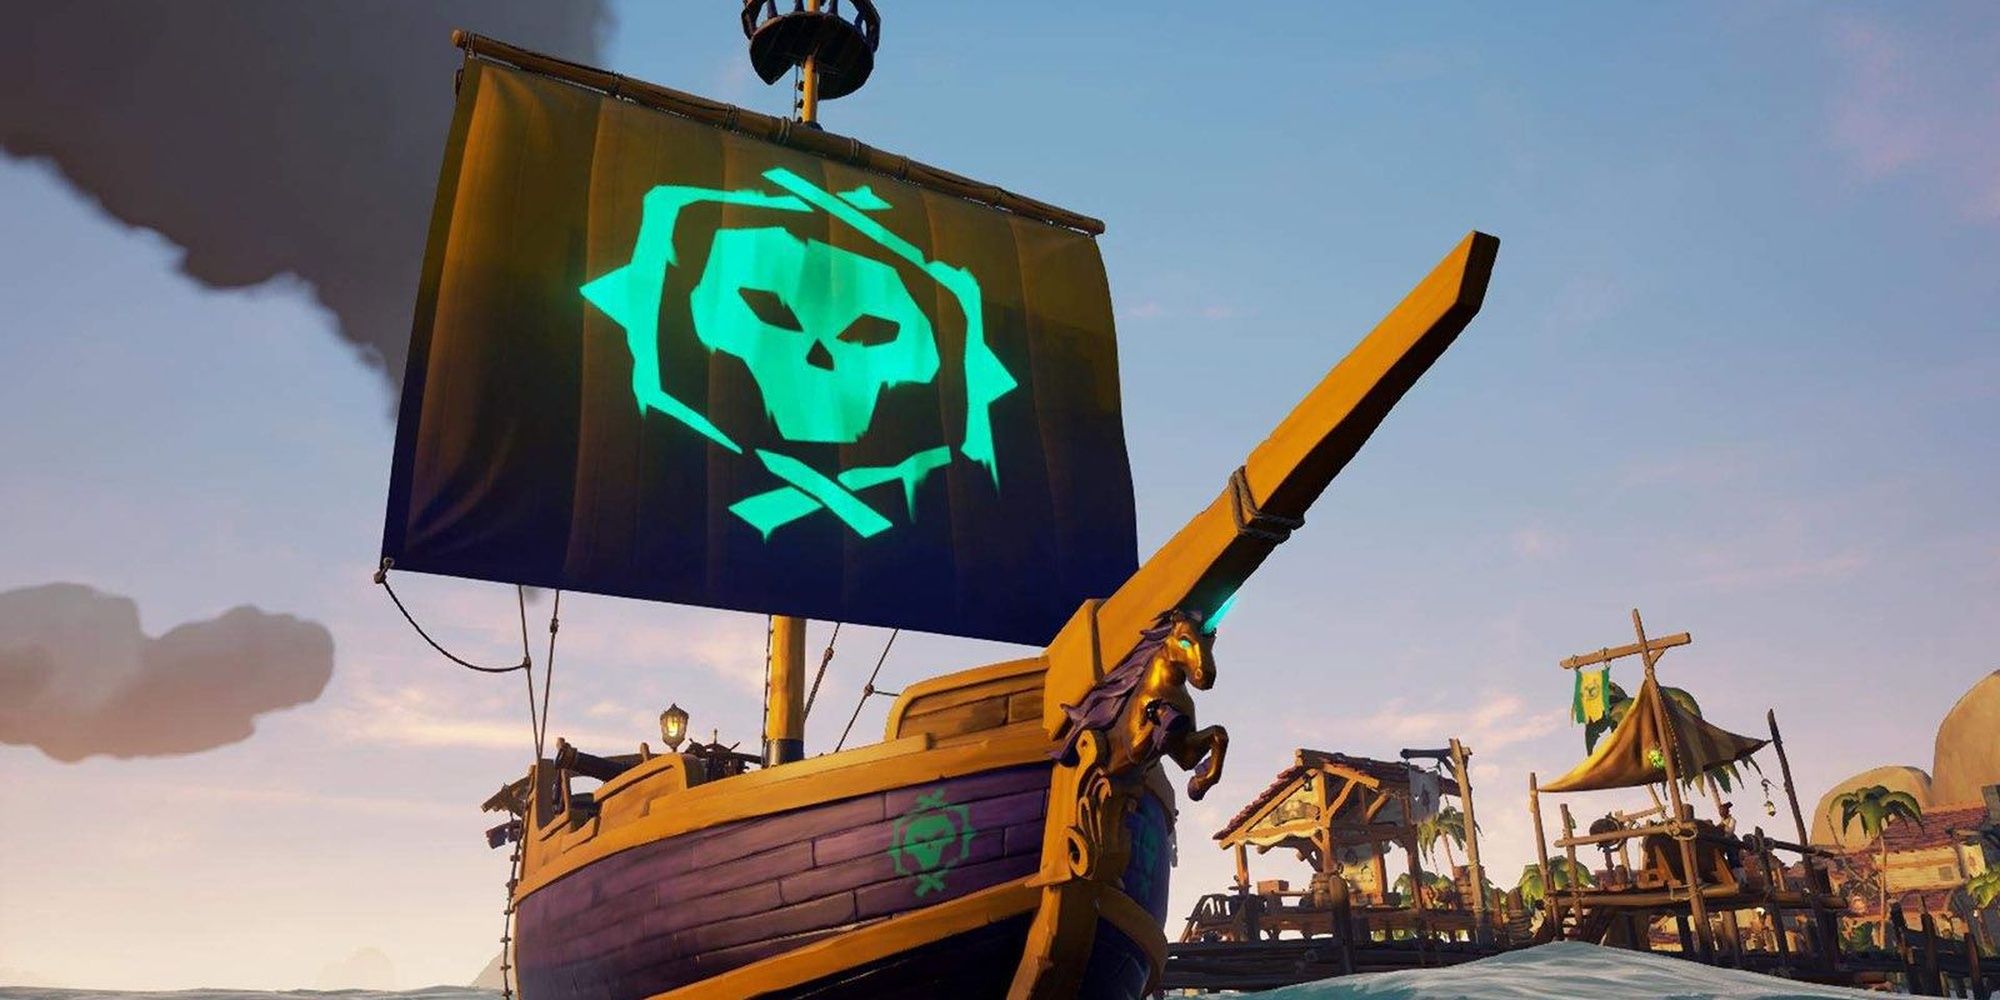 Sea Of Thieves: Sloop With Skull Decal On Its Sails